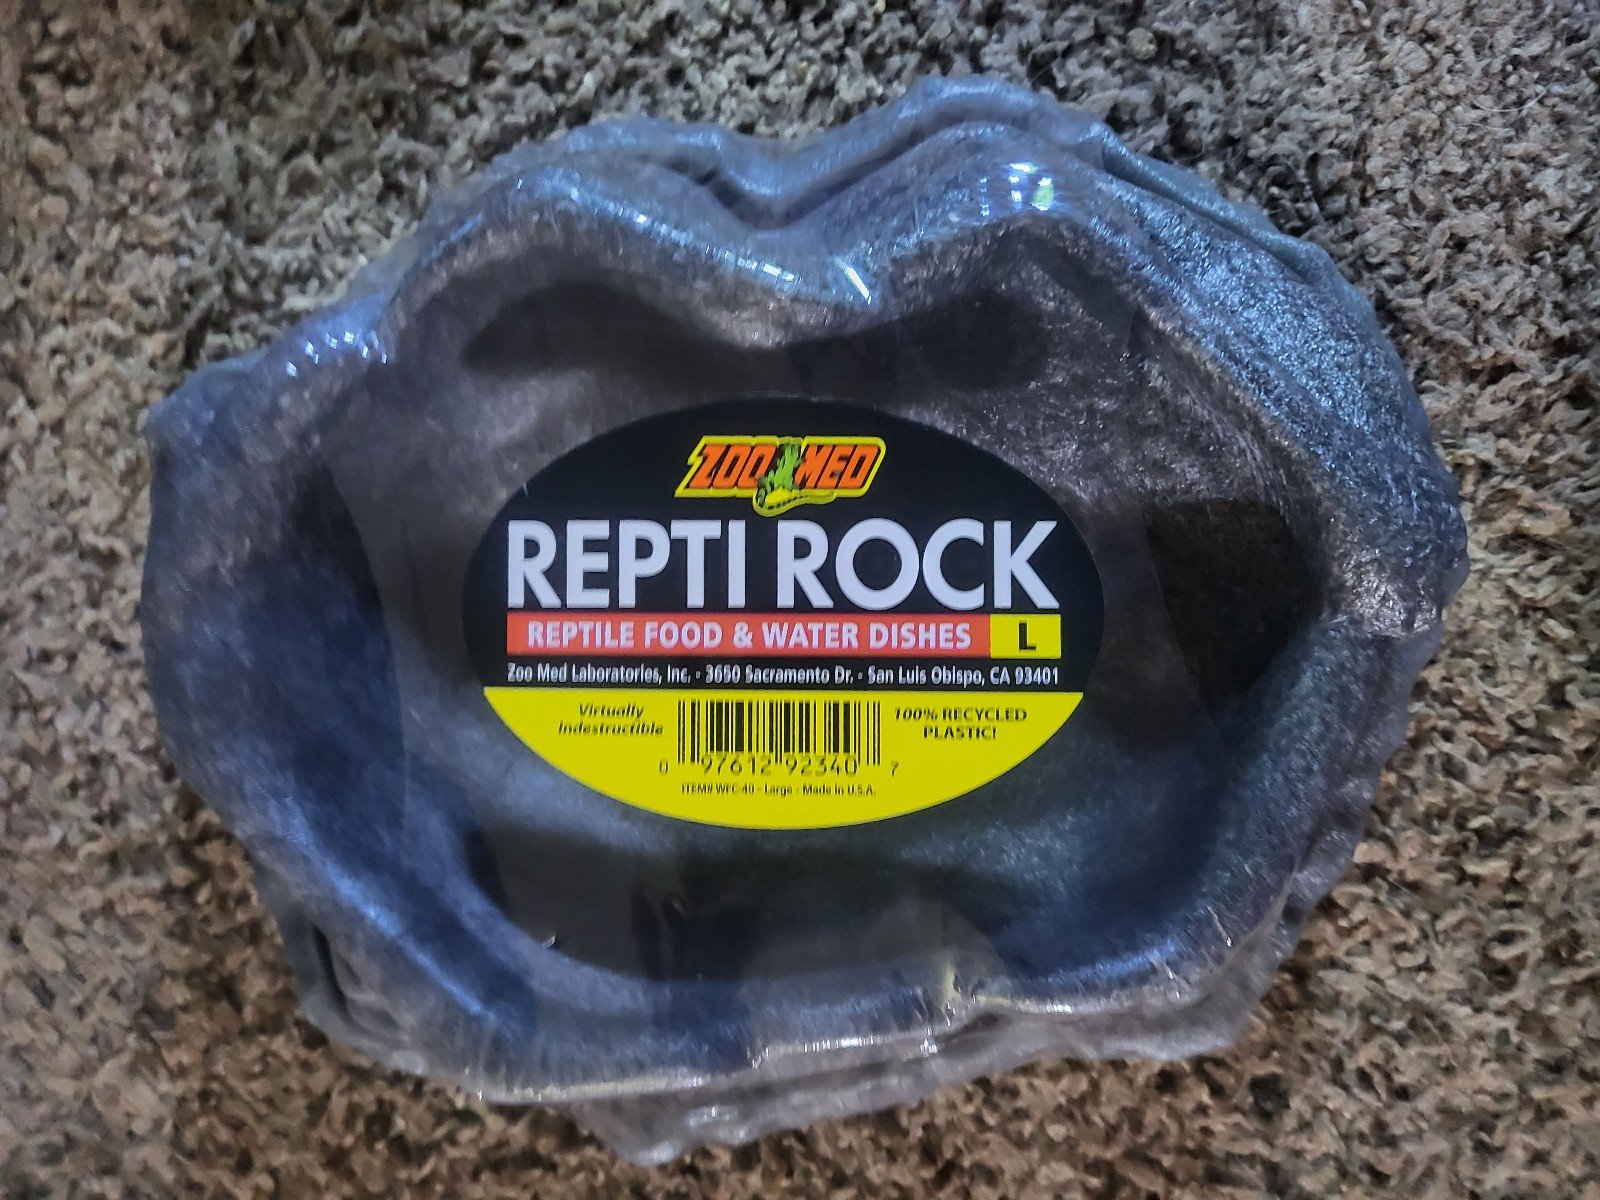 Grey rock reptile food dishes x2 QVlAY9fgu